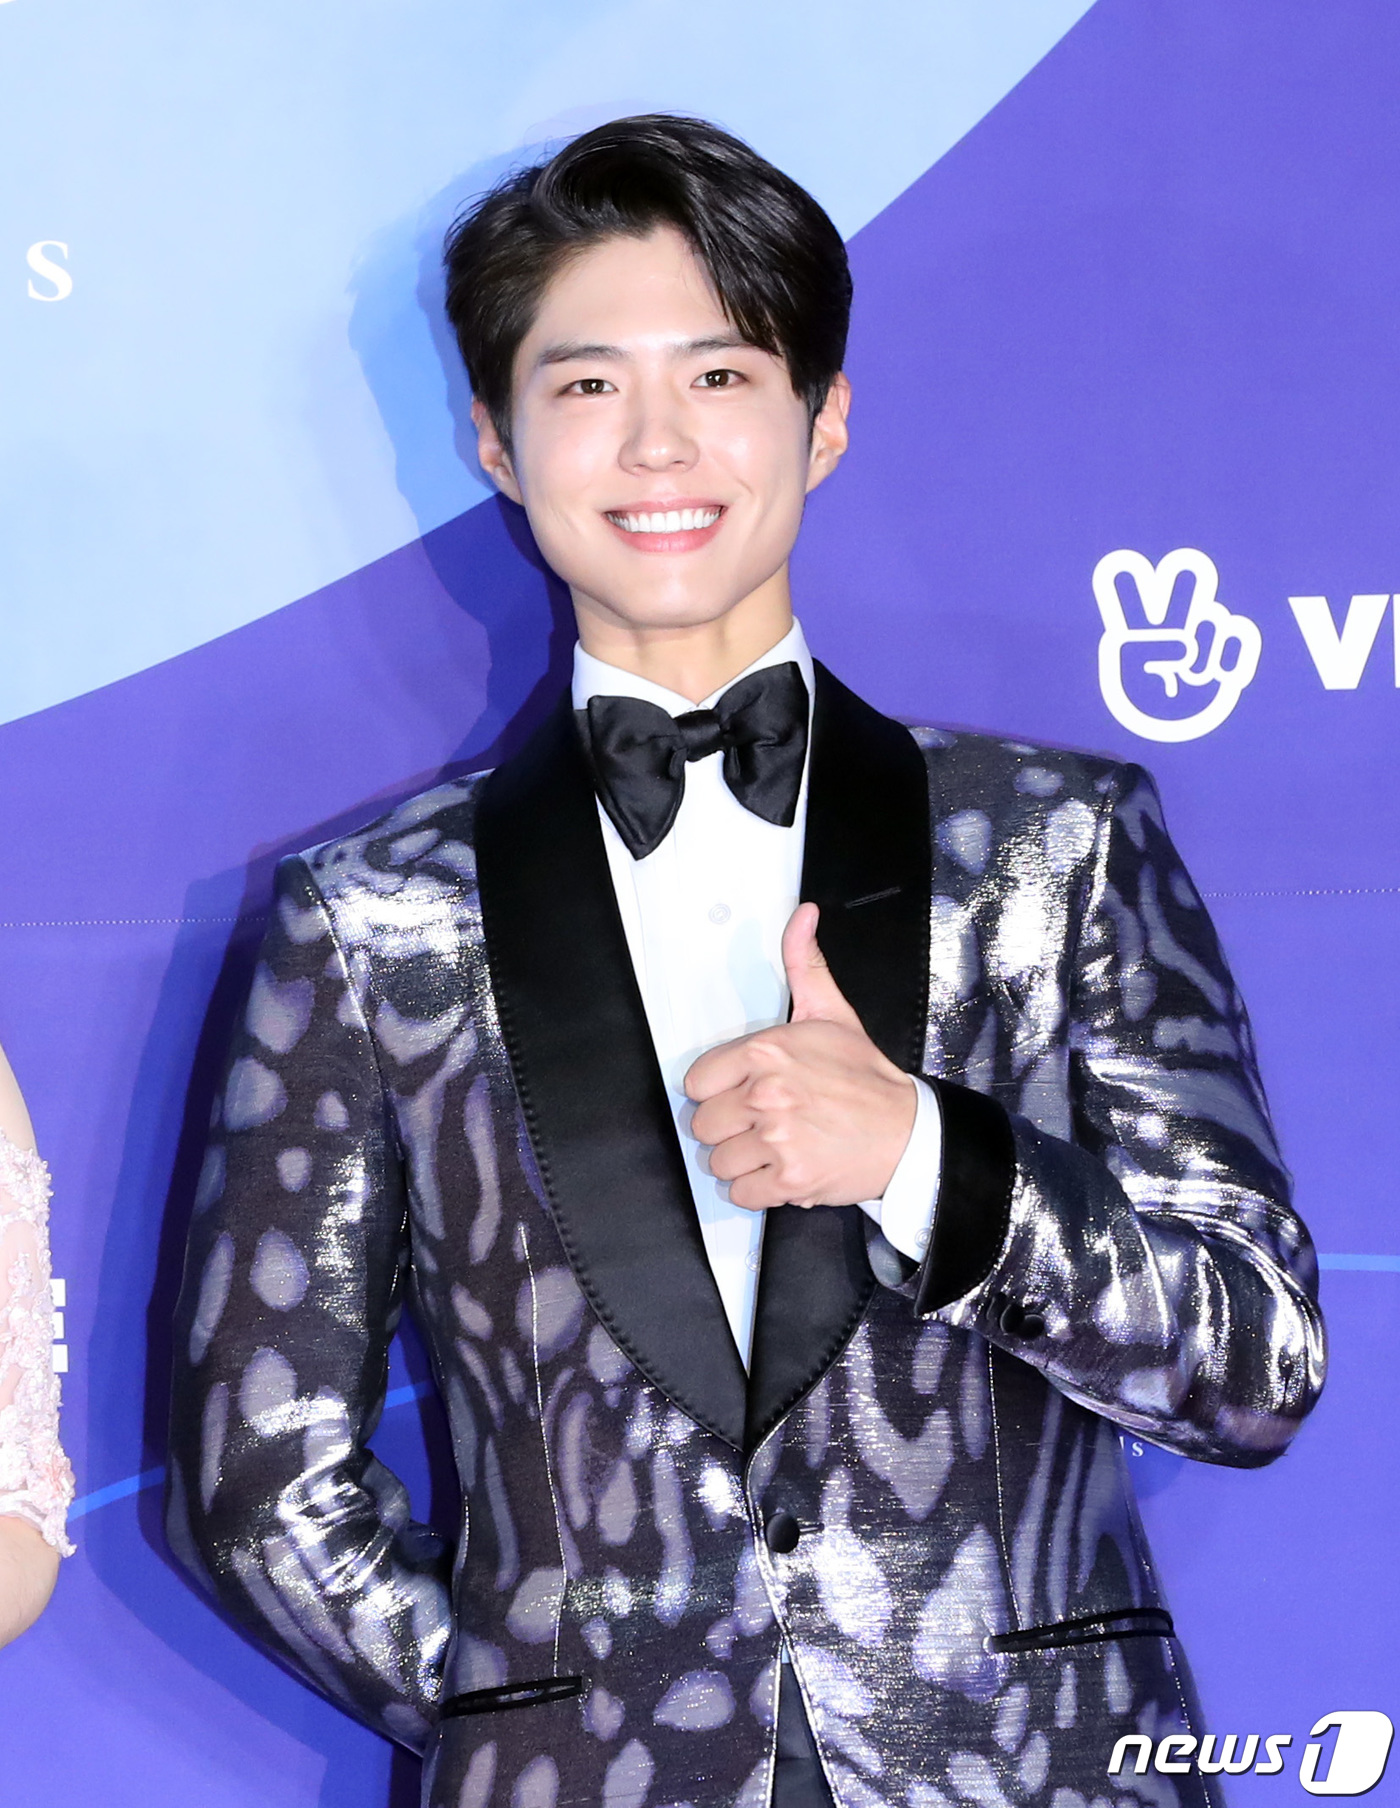 Seoul = = Actor Park Bo-gum (27) has confirmed Enlisted on August 31, when he passed the Navy Culture Promotional Service, and the Cheering of fans continues.Park Bo-gum has passed the Navy culture promotion bottle, Park Bo-gums agency Blossom Entertainment said in an official statement. We will be Enlisted on August 31.The agency said, We plan to finish filming the movie WonderLand and the drama Youth Record until Enlisted. I would like to ask for Cheering so that Park Bo-gum Actor can fulfill his obligations of defense in a healthy manner.Park Bo-gum, who majored in musicals at Myongji University, applied for the Navy Military Music and the Culture Promotional Division of the Grand Battalion, and conducted practical and interview tests at Navy Headquarters in Gyeryong City, Chungnam Province on the 1st of this month.He was named on the list of successful applicants announced at 10 am on the 25th.Park Bo-gum will be admitted to the 669th course of Navys disease at 2 pm on August 31 and will receive basic training for six weeks.Currently, Navy basic training is 5 weeks including the enlistment, but the training period will increase to 6 weeks from the enlistment on August 31.In the news of Park Bo-gums Enlisted confirmation, the netizens congratulated Cheering by sending a message of I will come to Actor only good, I will Cheering and bless the future, Congratulations and constant Cheering, and Cheering to go well.Meanwhile, Park Bo-gum is currently shooting the movie WonderLand and TVN drama Youth Record.WonderLand is a drama based on the virtual world WonderLand.Director Kim Tae-yong directed Park Bo-gum and actor-sharing reservoir Tangway Choi Woo-sik Jung Yoo-mi were named in the casting lineup.Youth Record is a drama depicting the contents of giving fulfillment and hope through the influence of the spoon that the parents pass on in the process of becoming an actor and star in the background of Hannam-dong. Park Bo-gum is in close contact with Park So-dam.